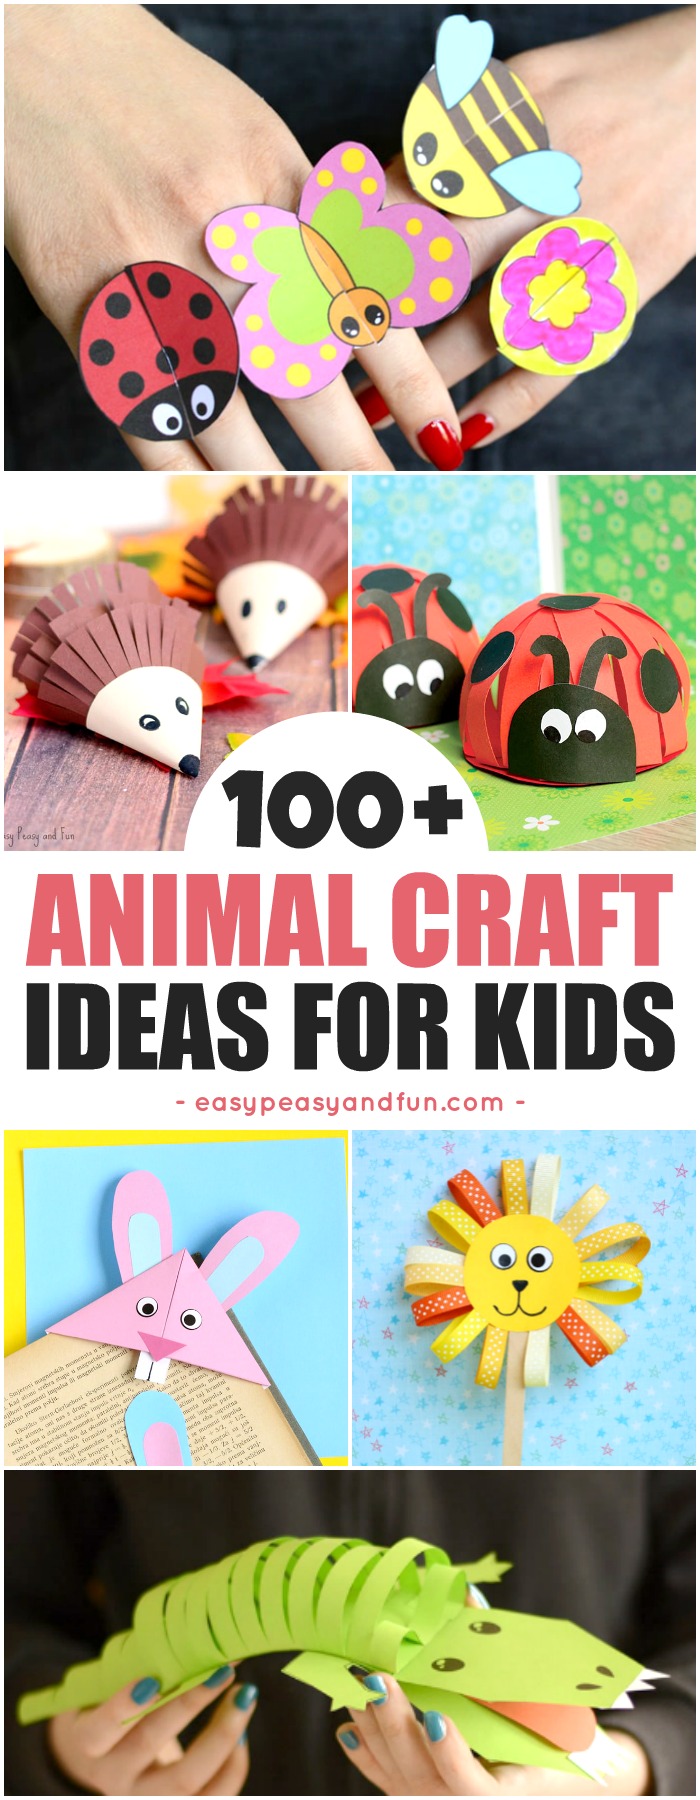 Super Fun Animal Crafts for Kids. Fun crafting ideas from bugs, zoo animals, farm animals, ocean animals and more. Perfect art and crafts for home or classroom #craftsforkids #preschool #kindergarten